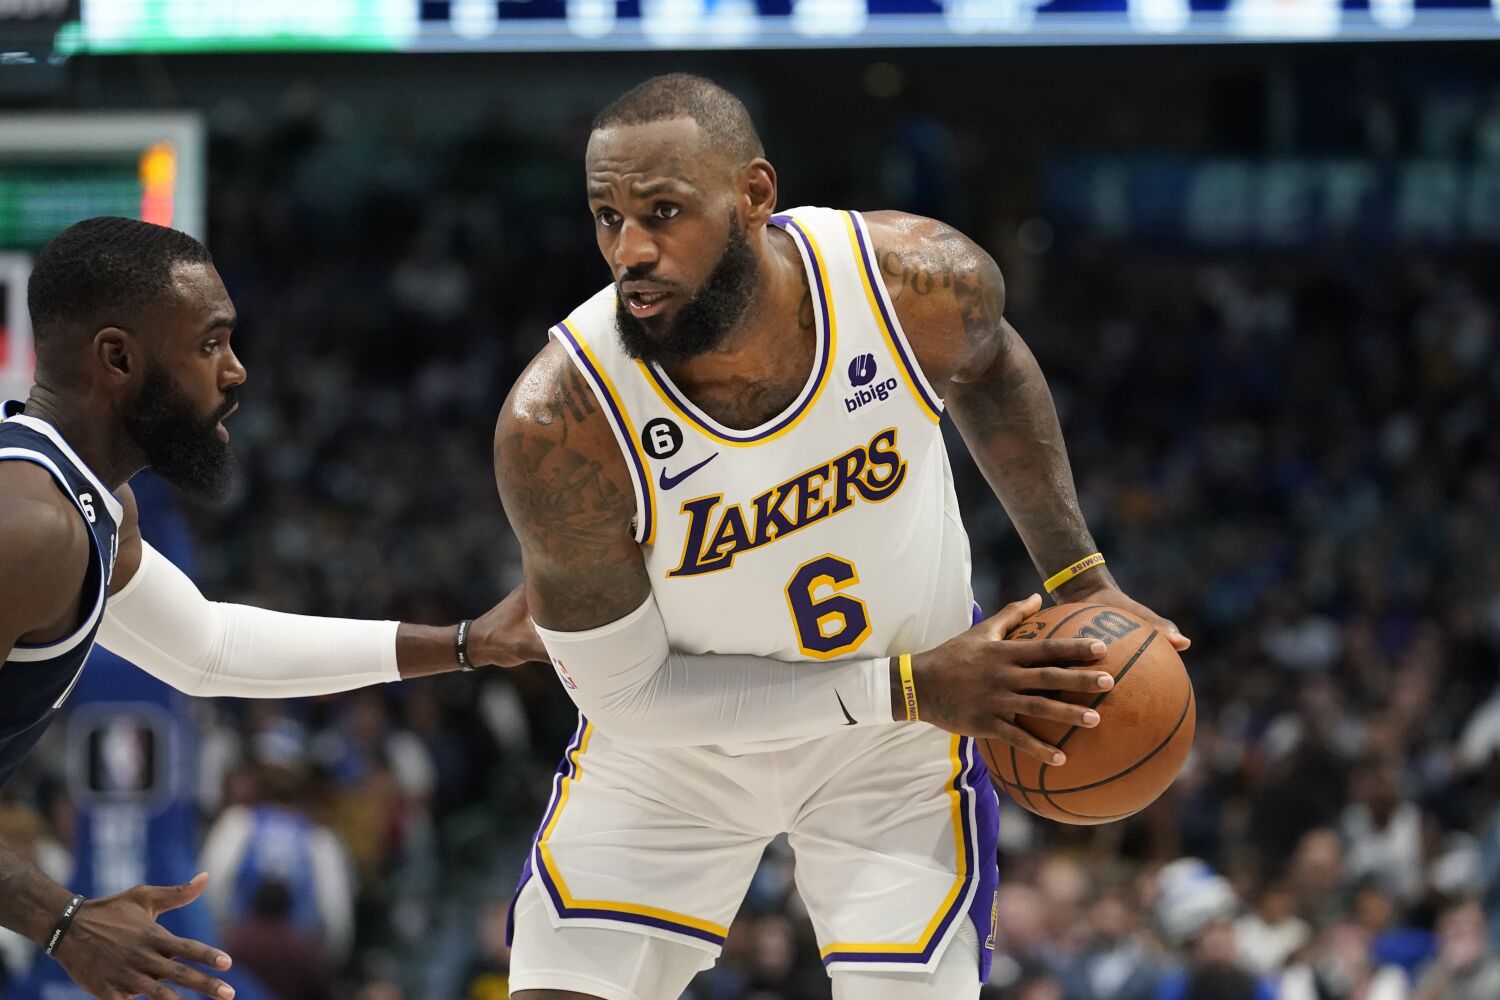 LeBron James has tendon injury in foot, will be reevaluated in three weeks